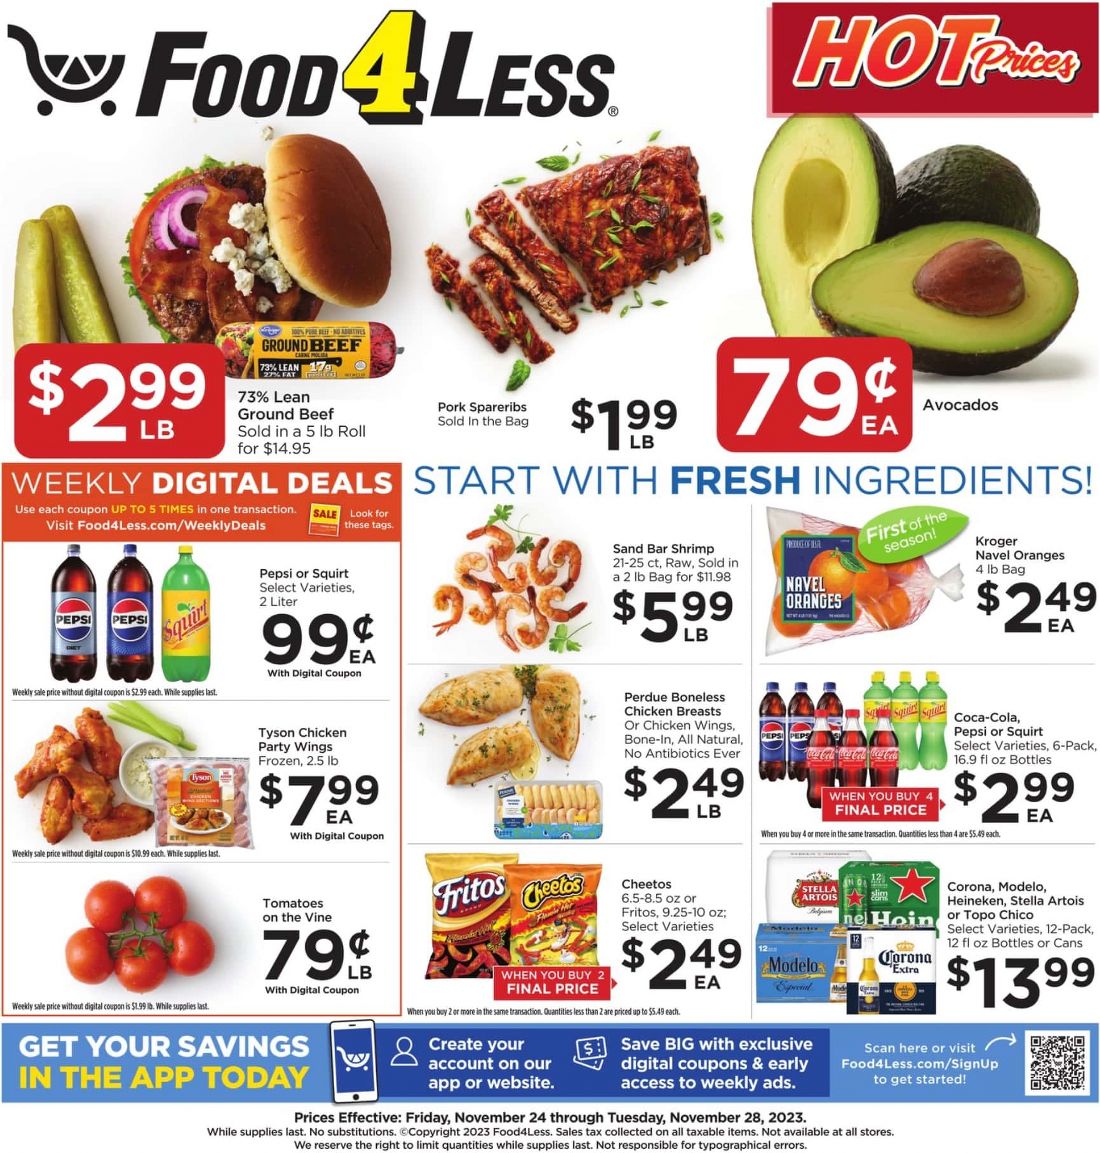 Food 4 Less Black Friday June 2024 Weekly Sales, Deals, Discounts and Digital Coupons.